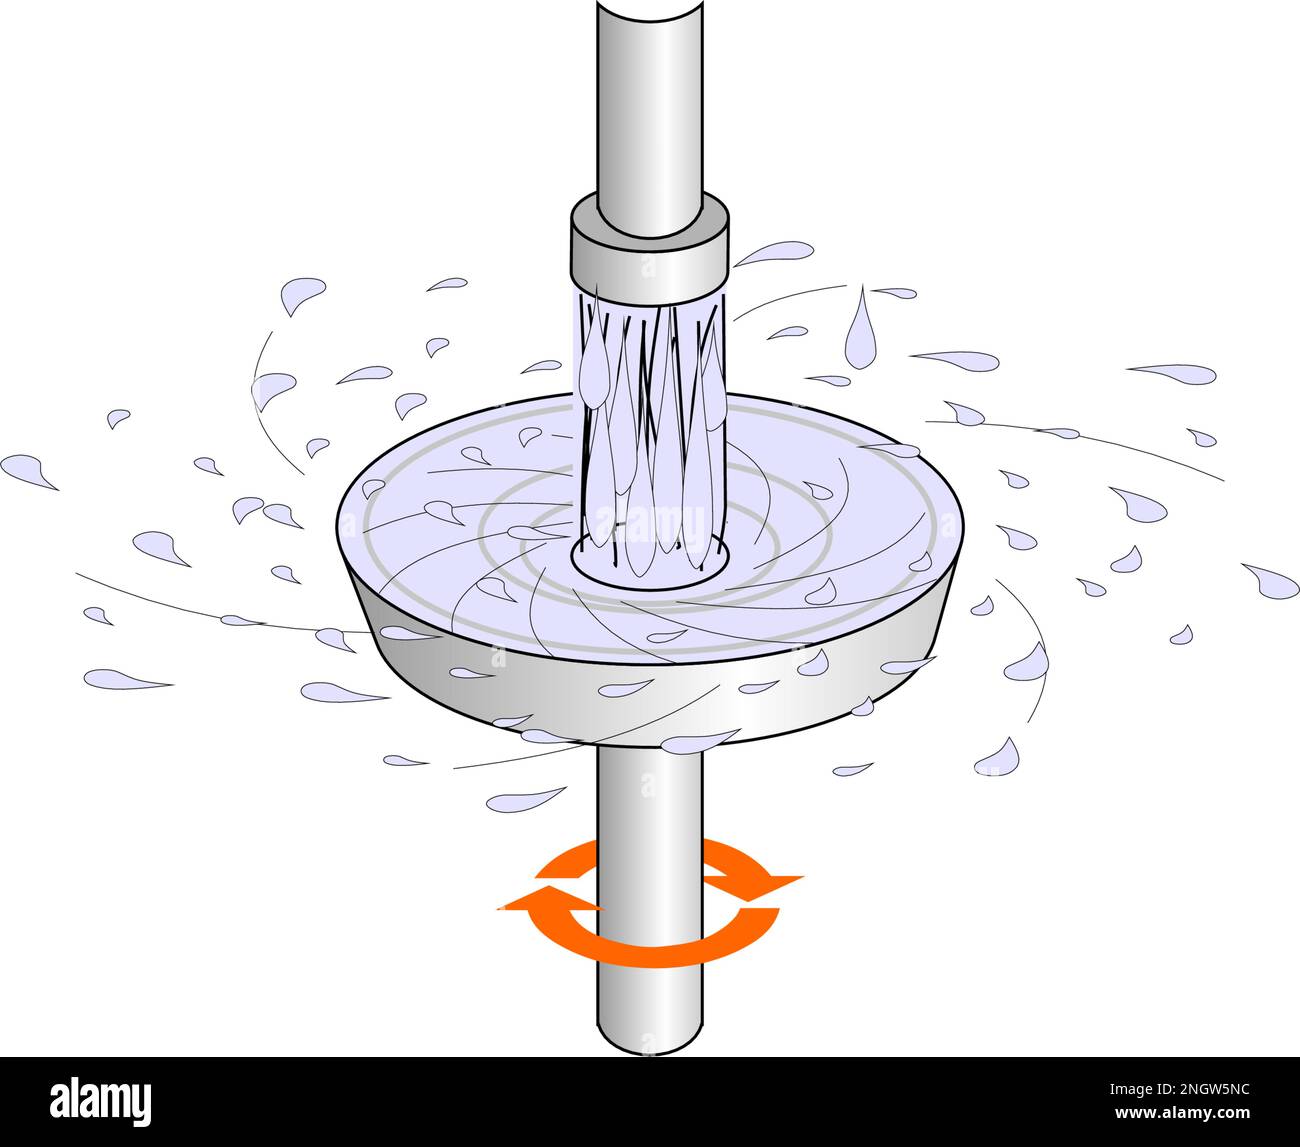 Effect of Centrifugal Force on liquids Stock Vector